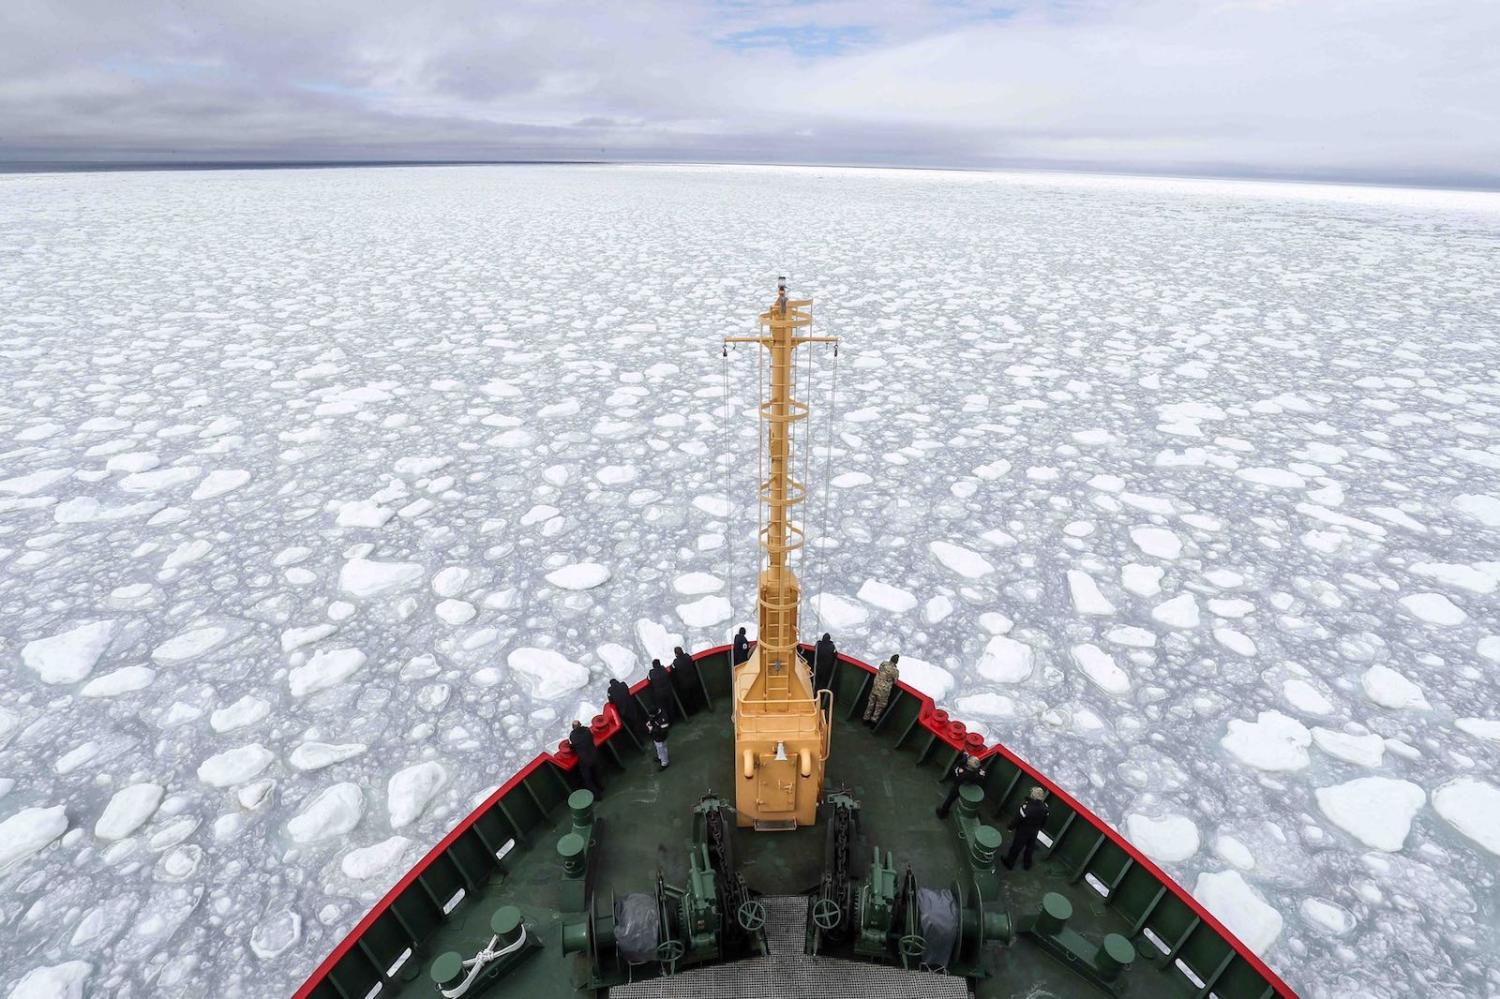 Aboard the British Royal Navy’s ice patrol ship HMS Protector (Photo: HMSProtector/Twitter)